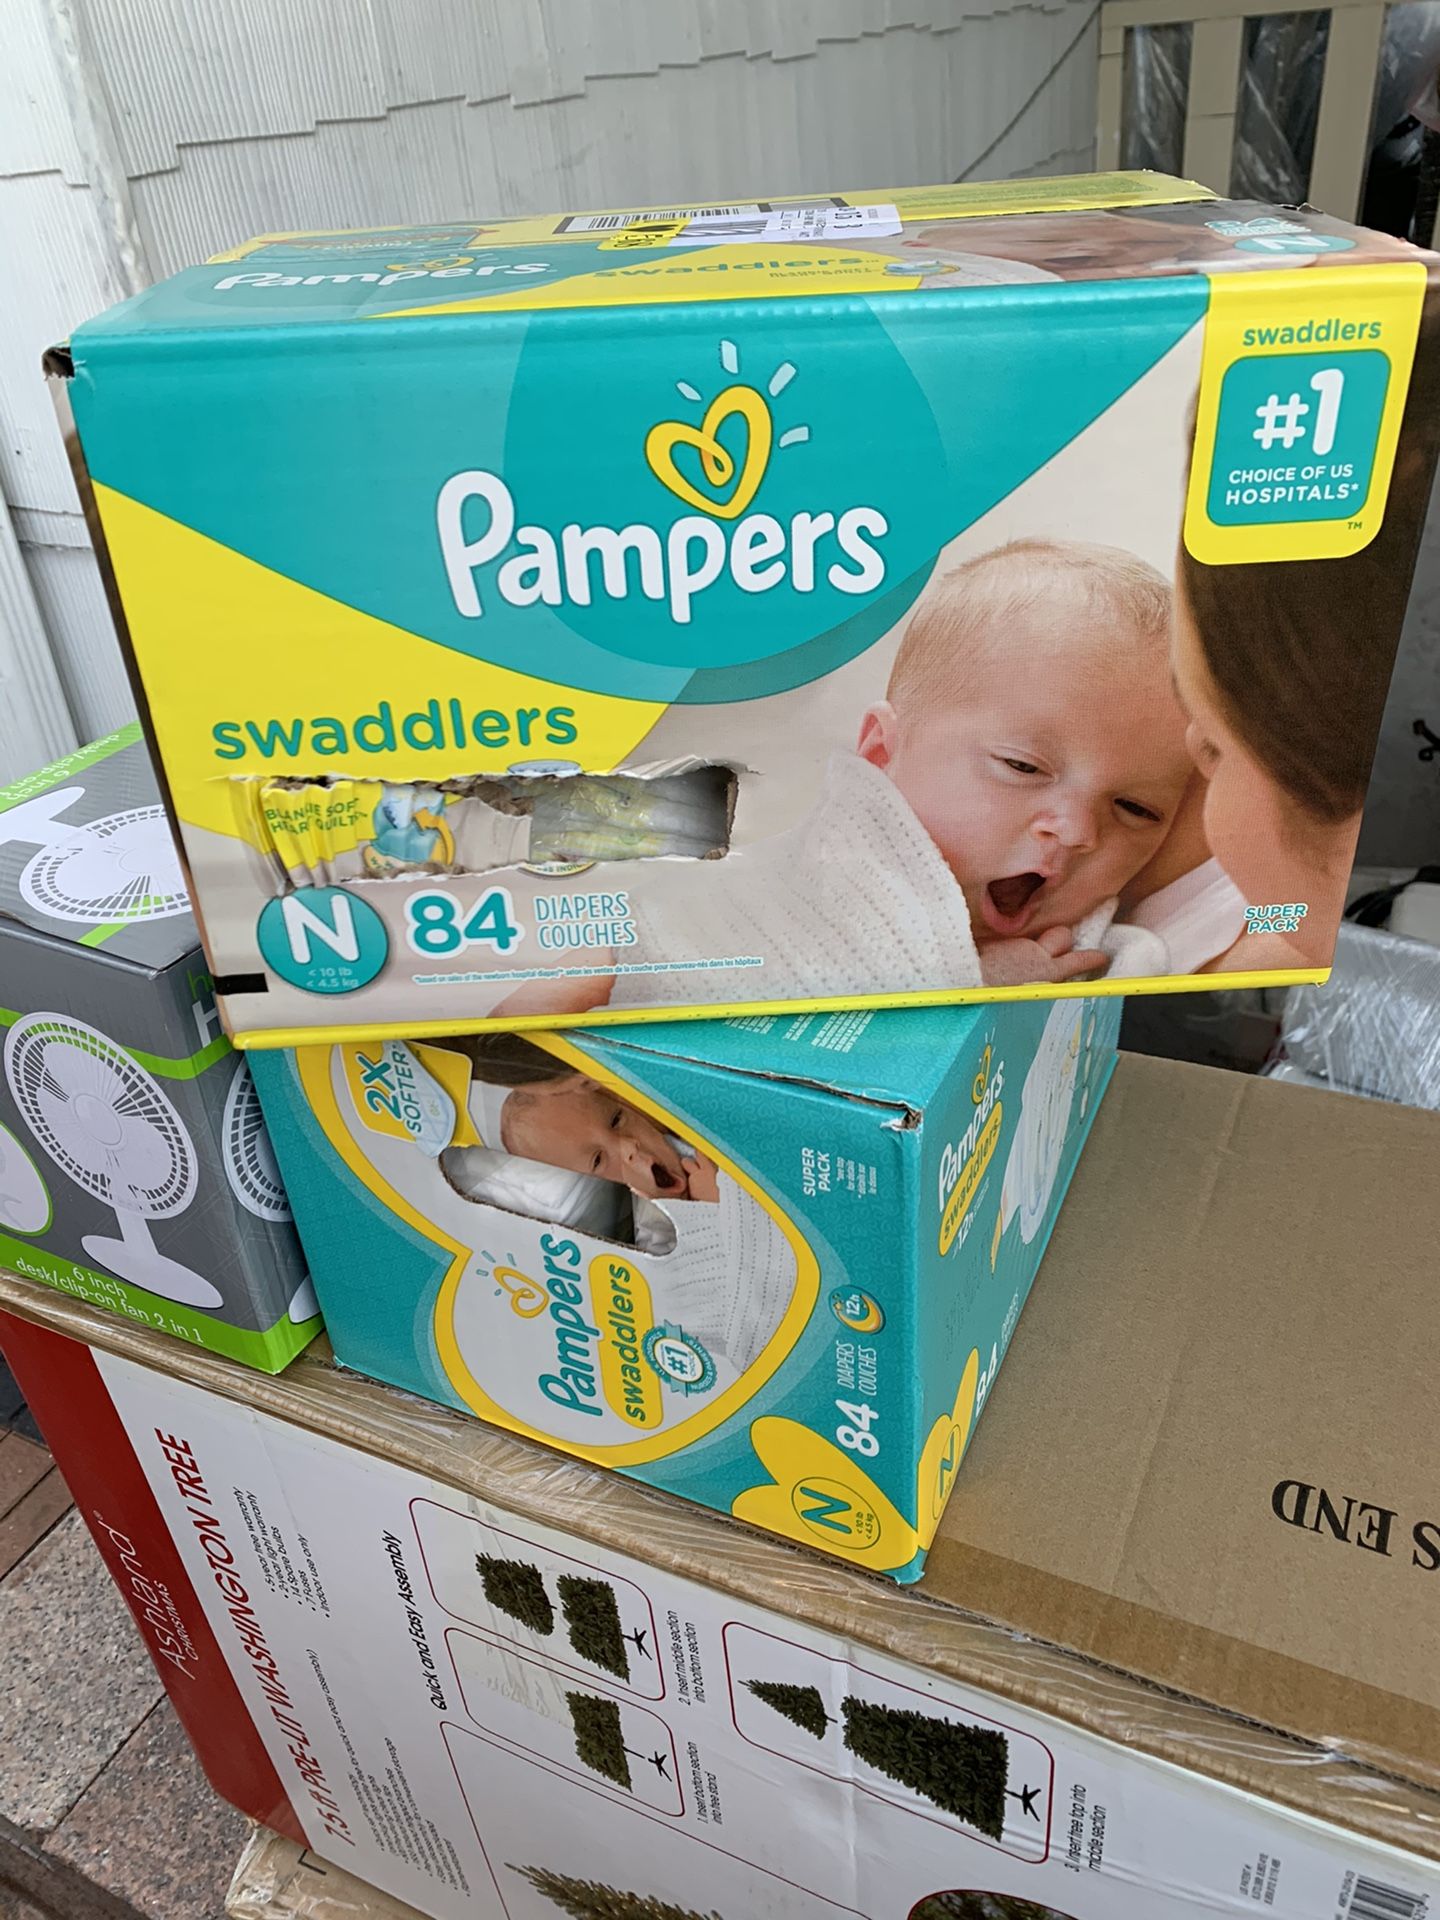 Pampers NewBorn Diapers